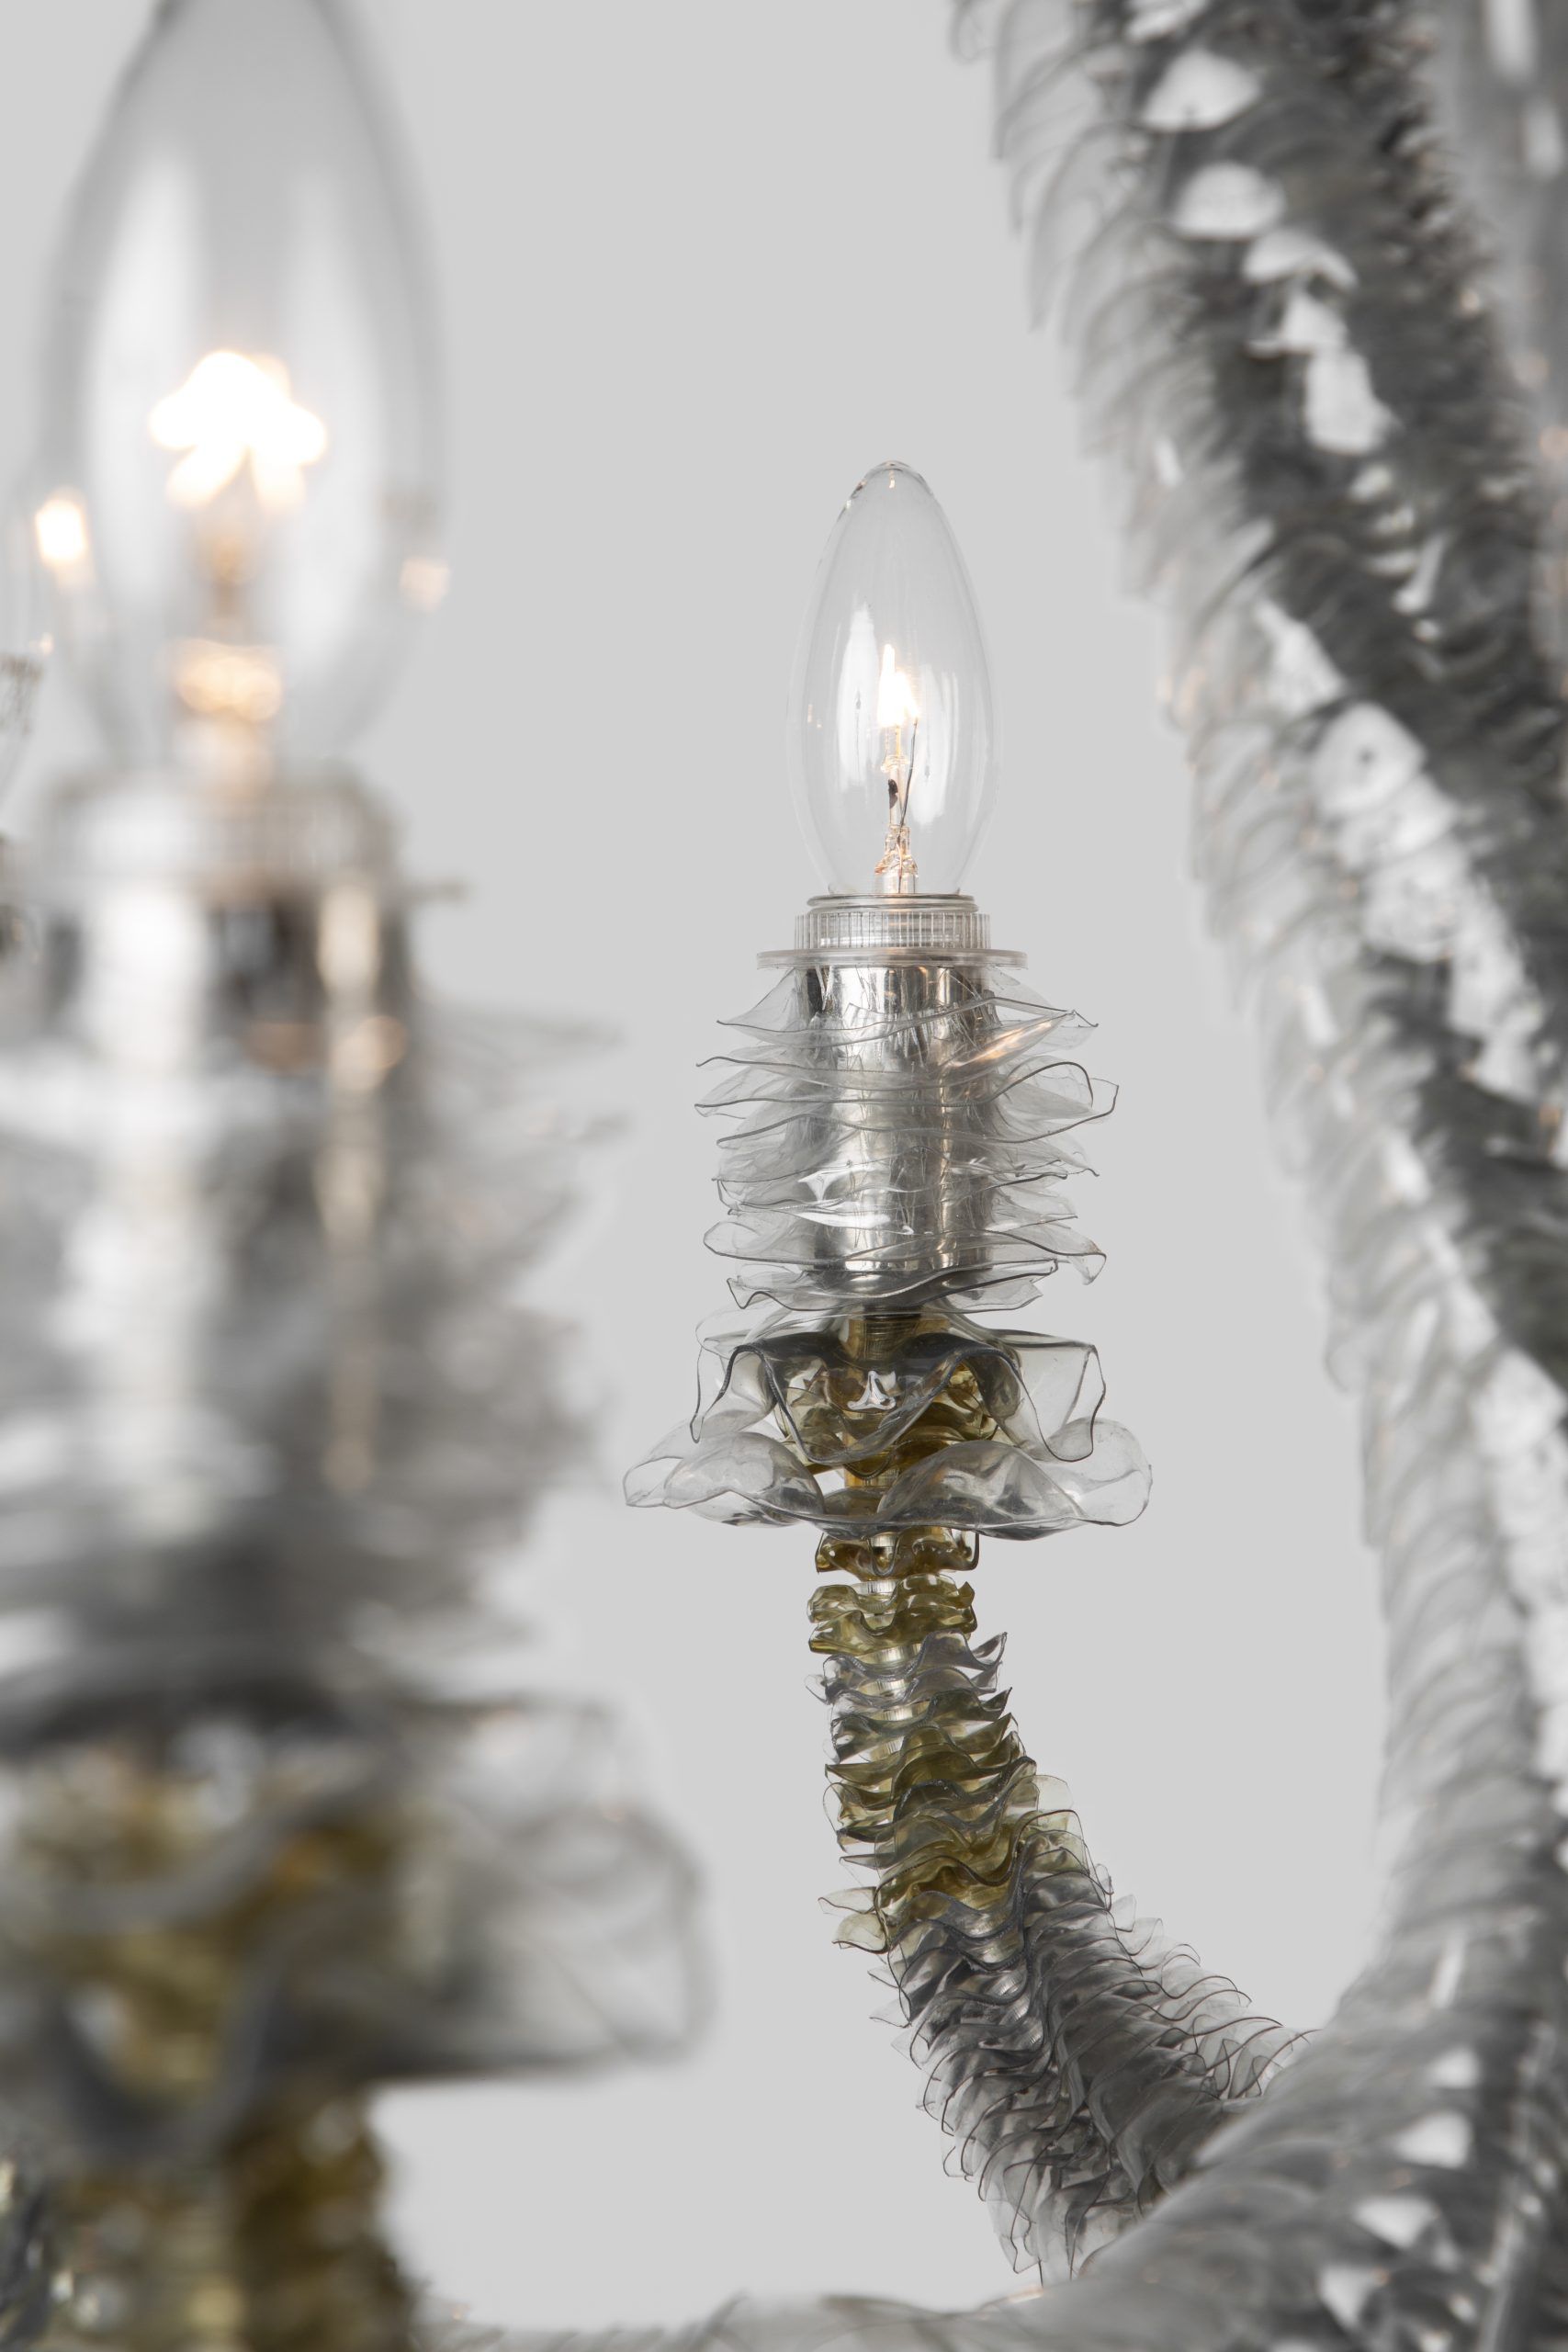 Thierry Jeannot OCTOmut Chandelier courtesy ammann gallery